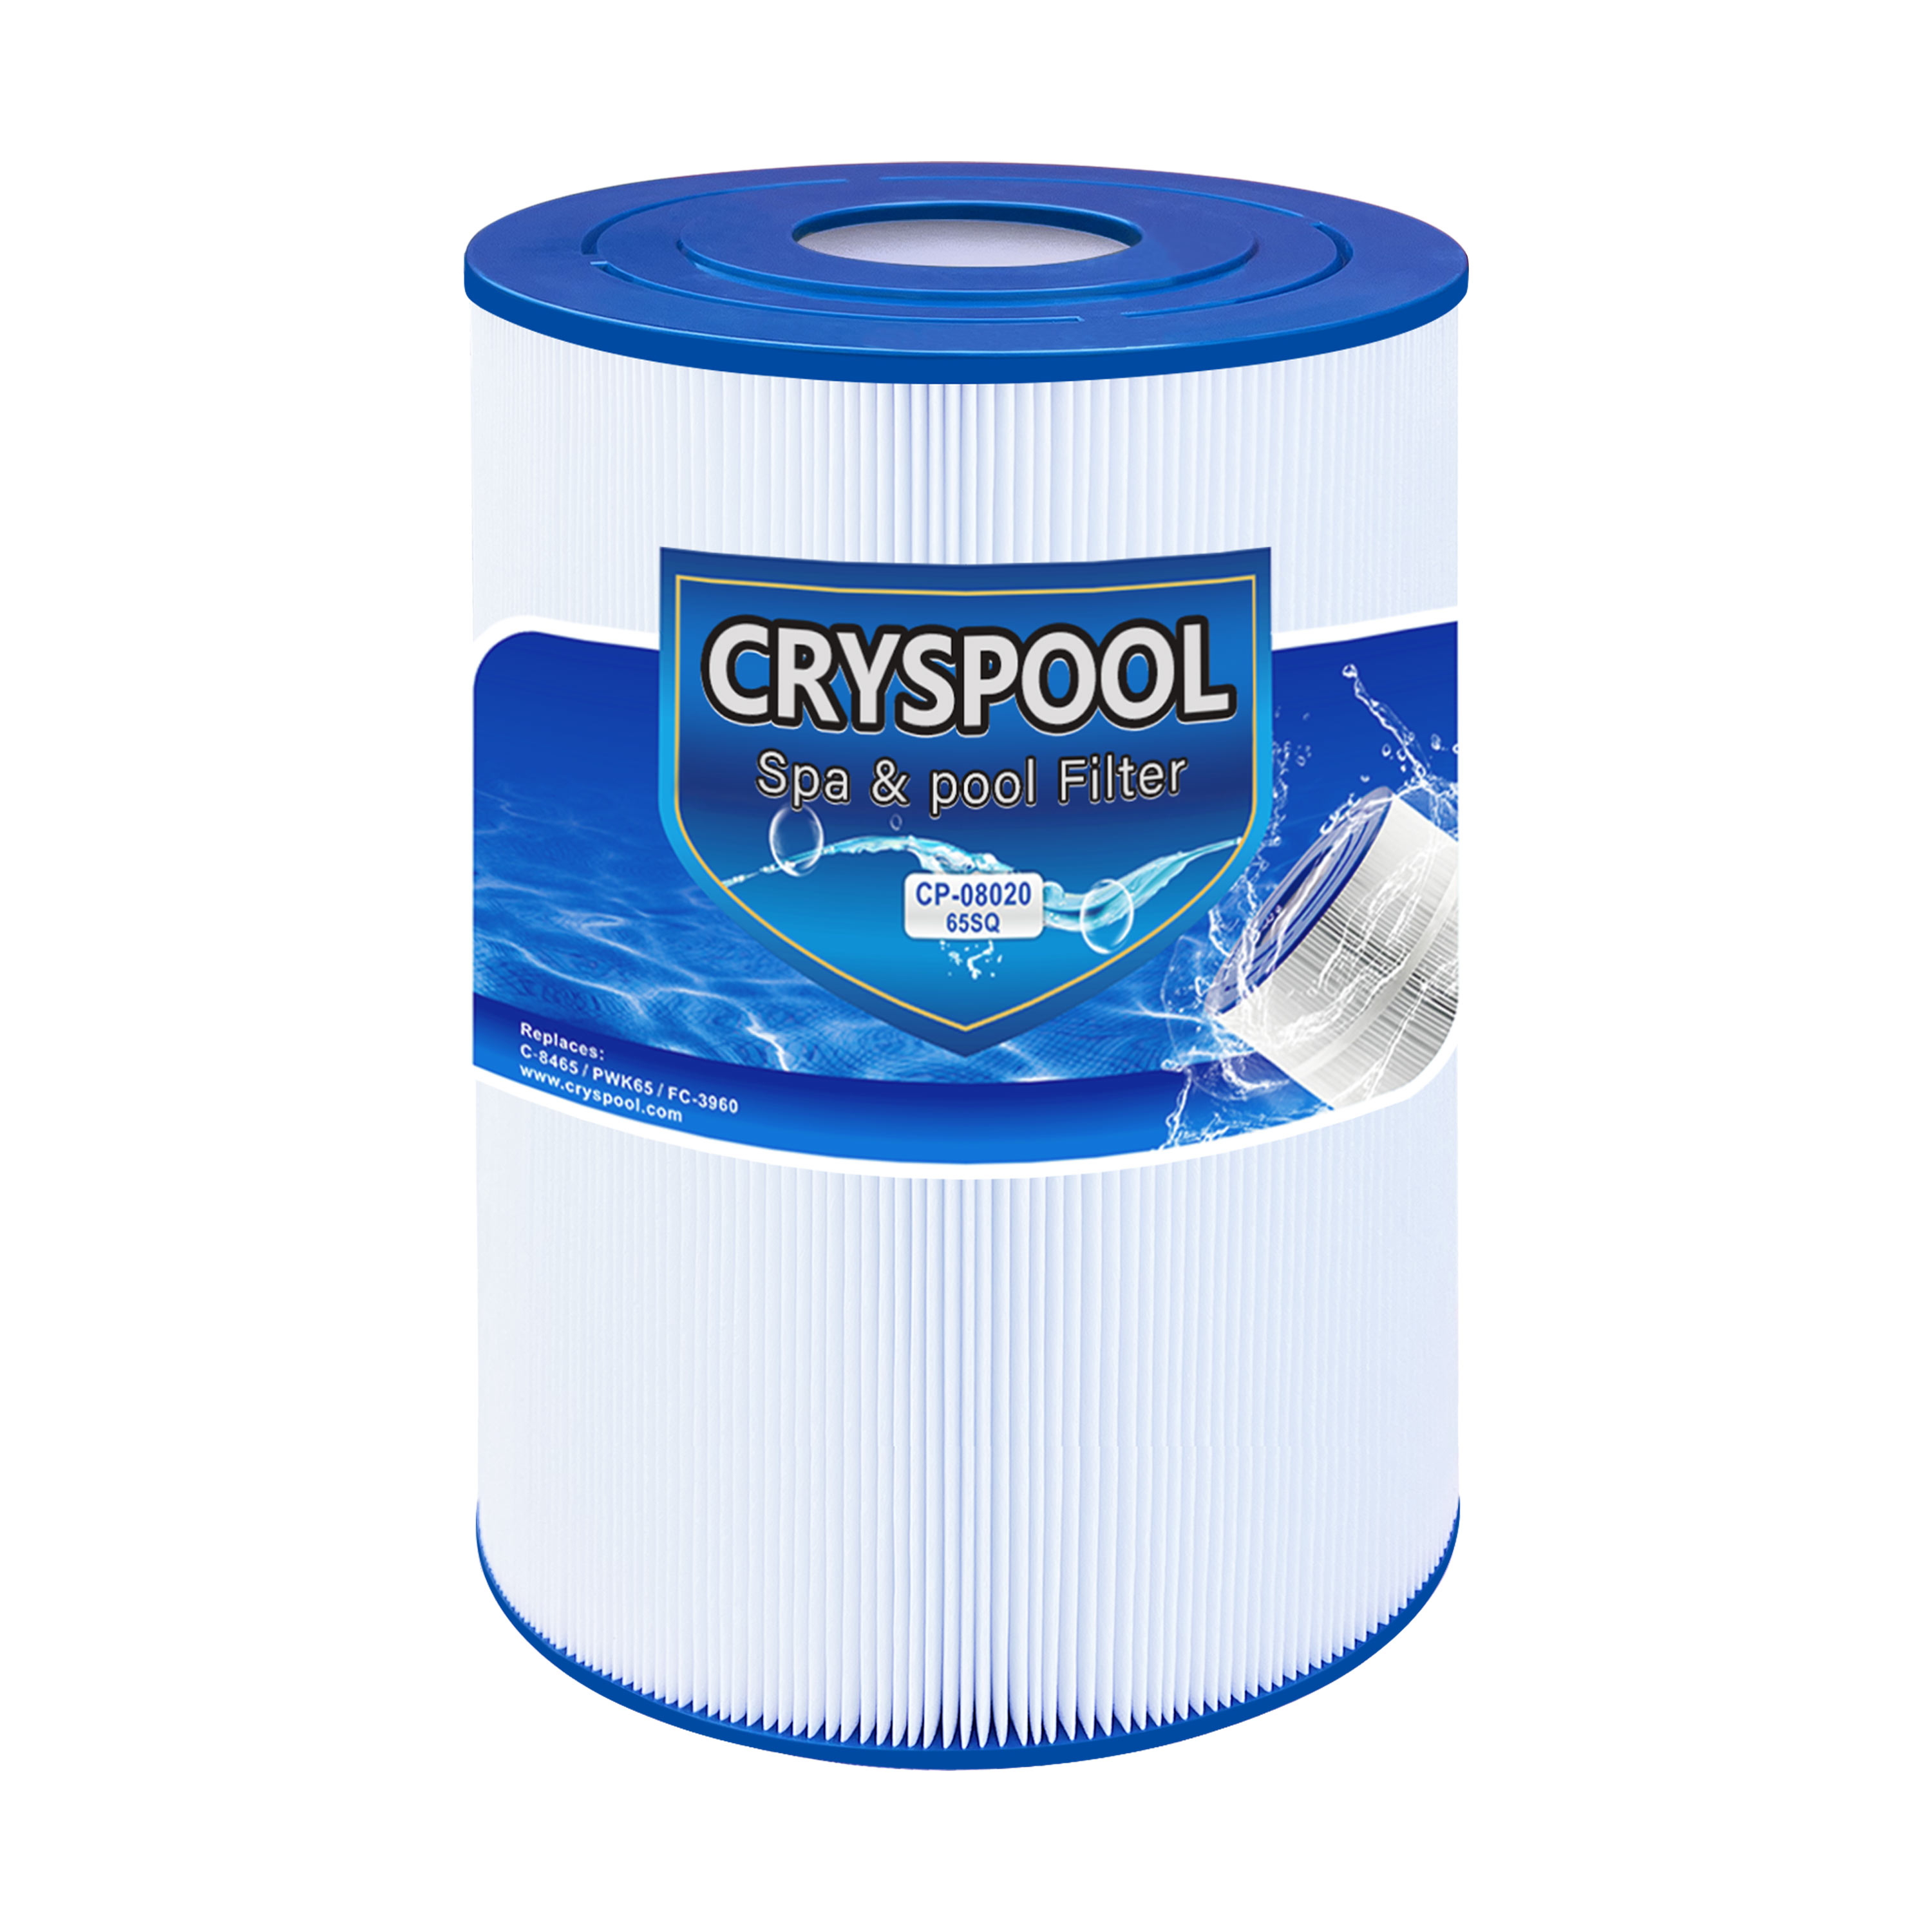 Super Purchasing for Filbur Fc-2375 - Cryspool pwk65 Compatible with Watkins 31114, Hot Spot spa Filter,Unicel C-8465, Filbur FC-3960, 71827, 71828, Watkins 65 sq.ft hot tub Filter. – Cryspool